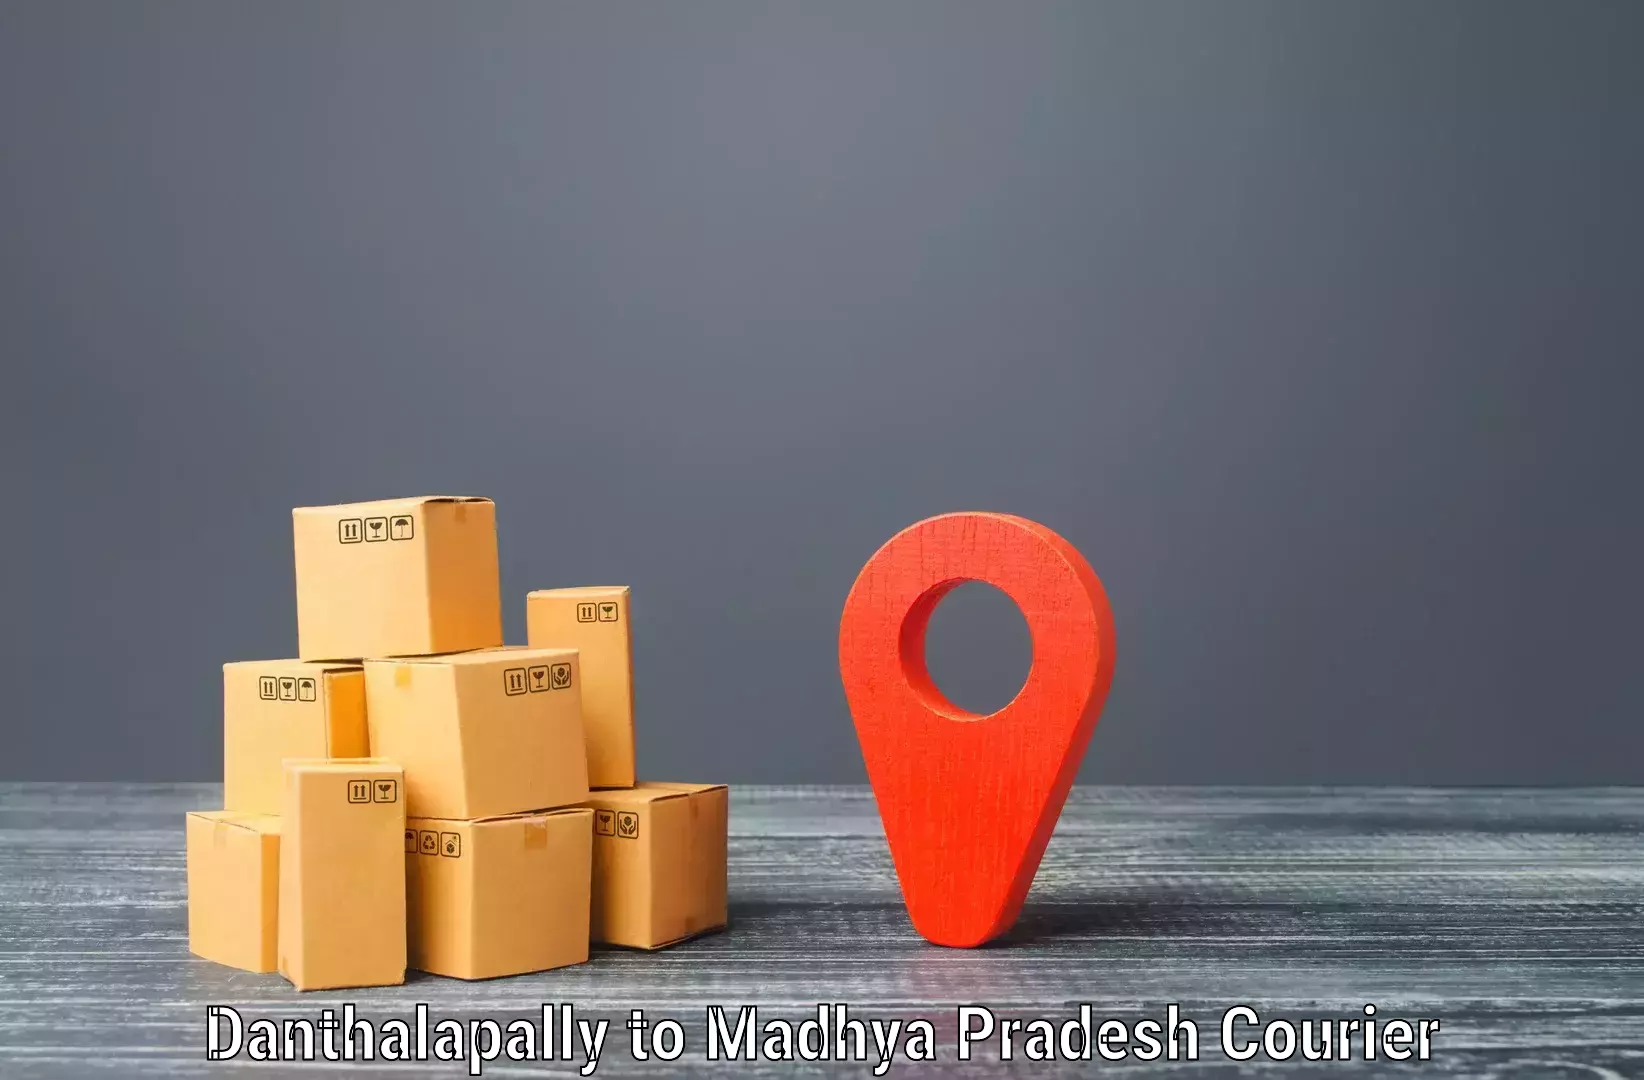 Large-scale shipping solutions Danthalapally to Sheopur